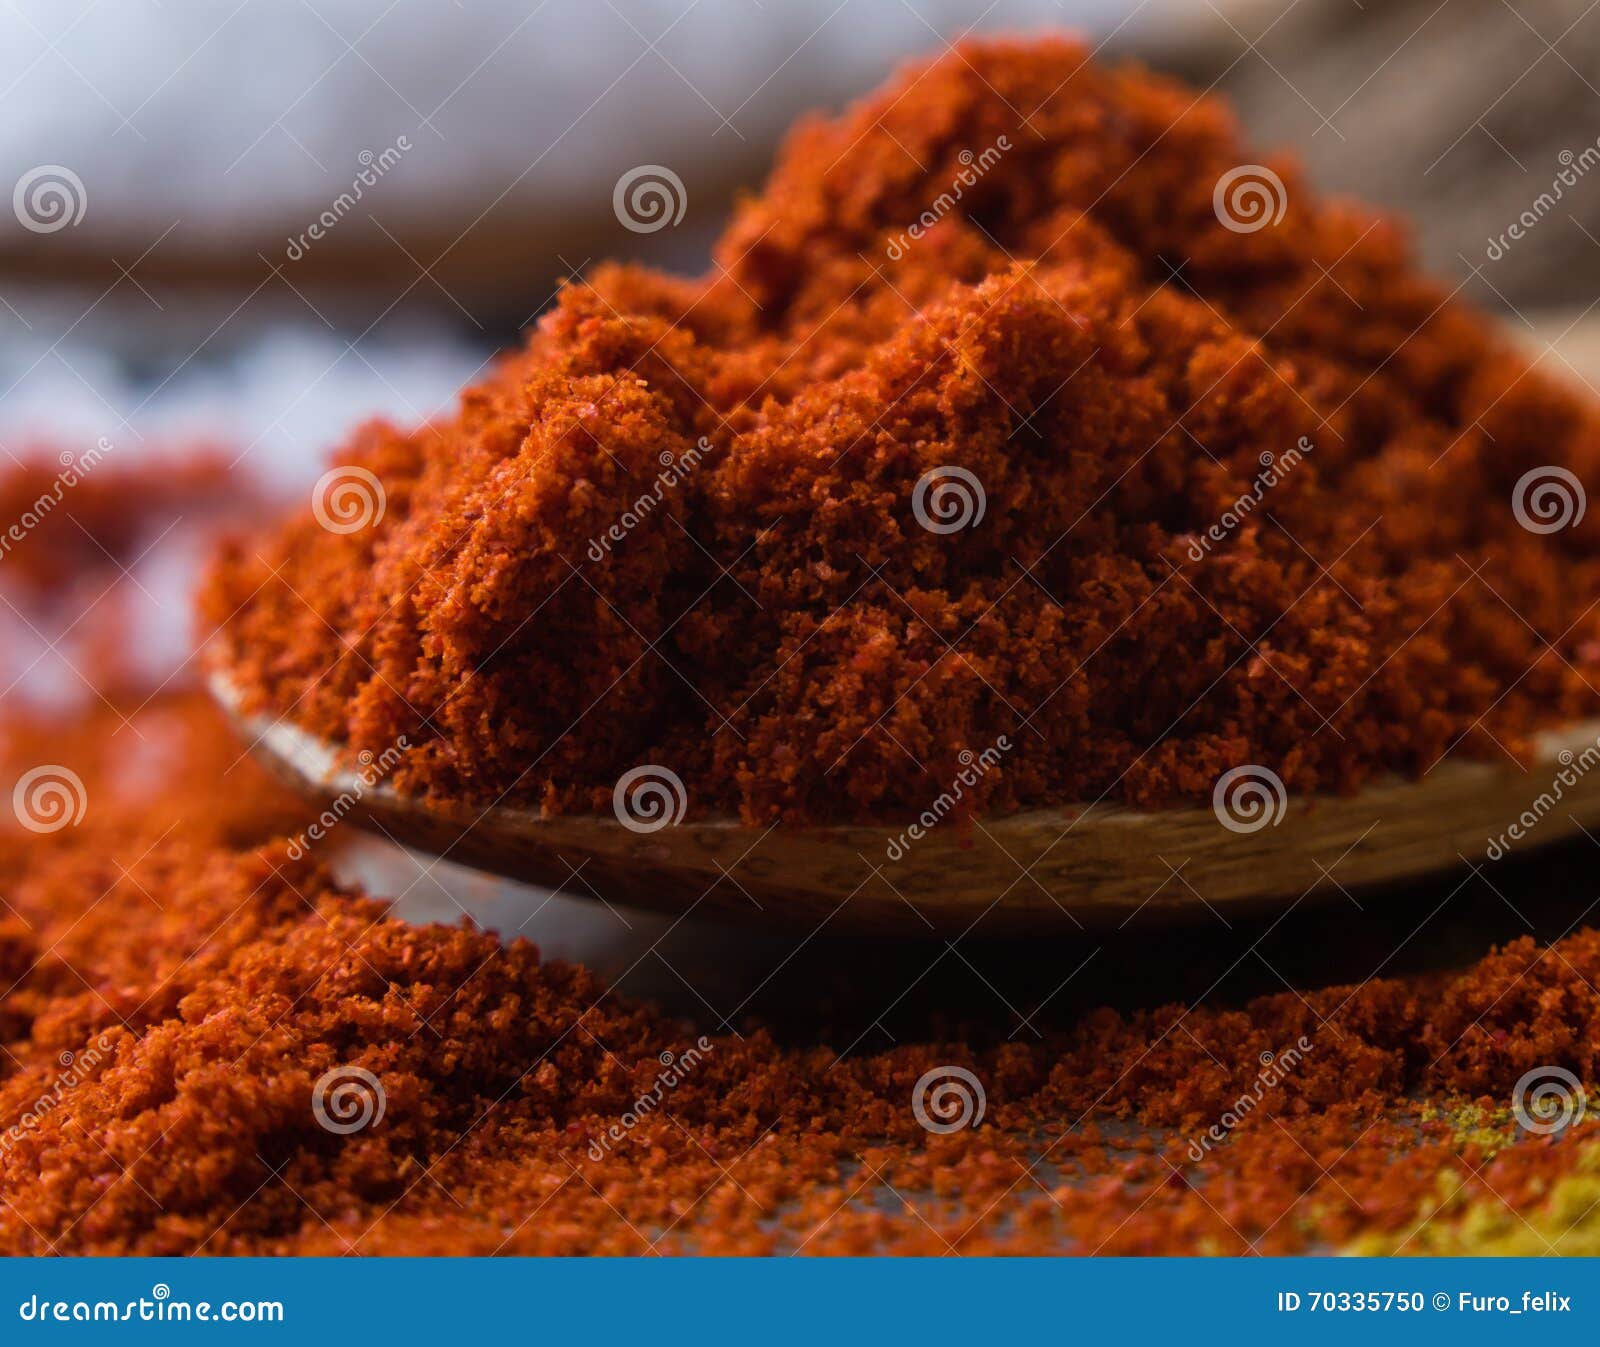 close up of red paprika spice